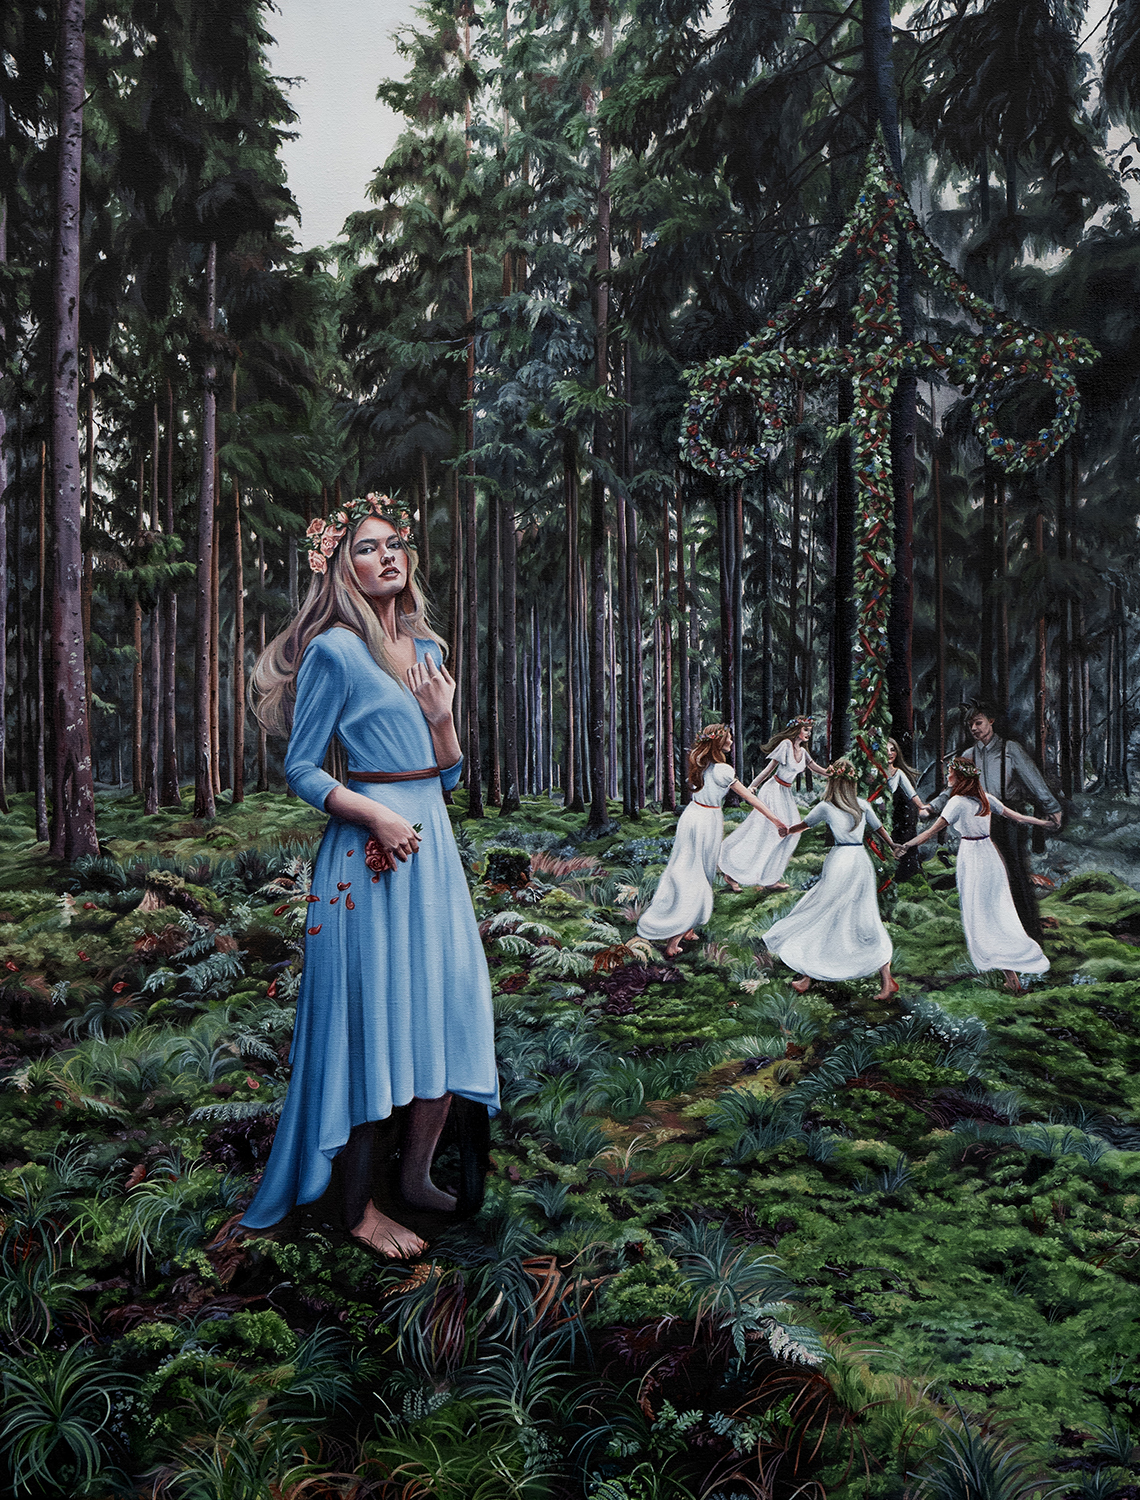 midsommar painting ashes we all fall down by christina ridgeway